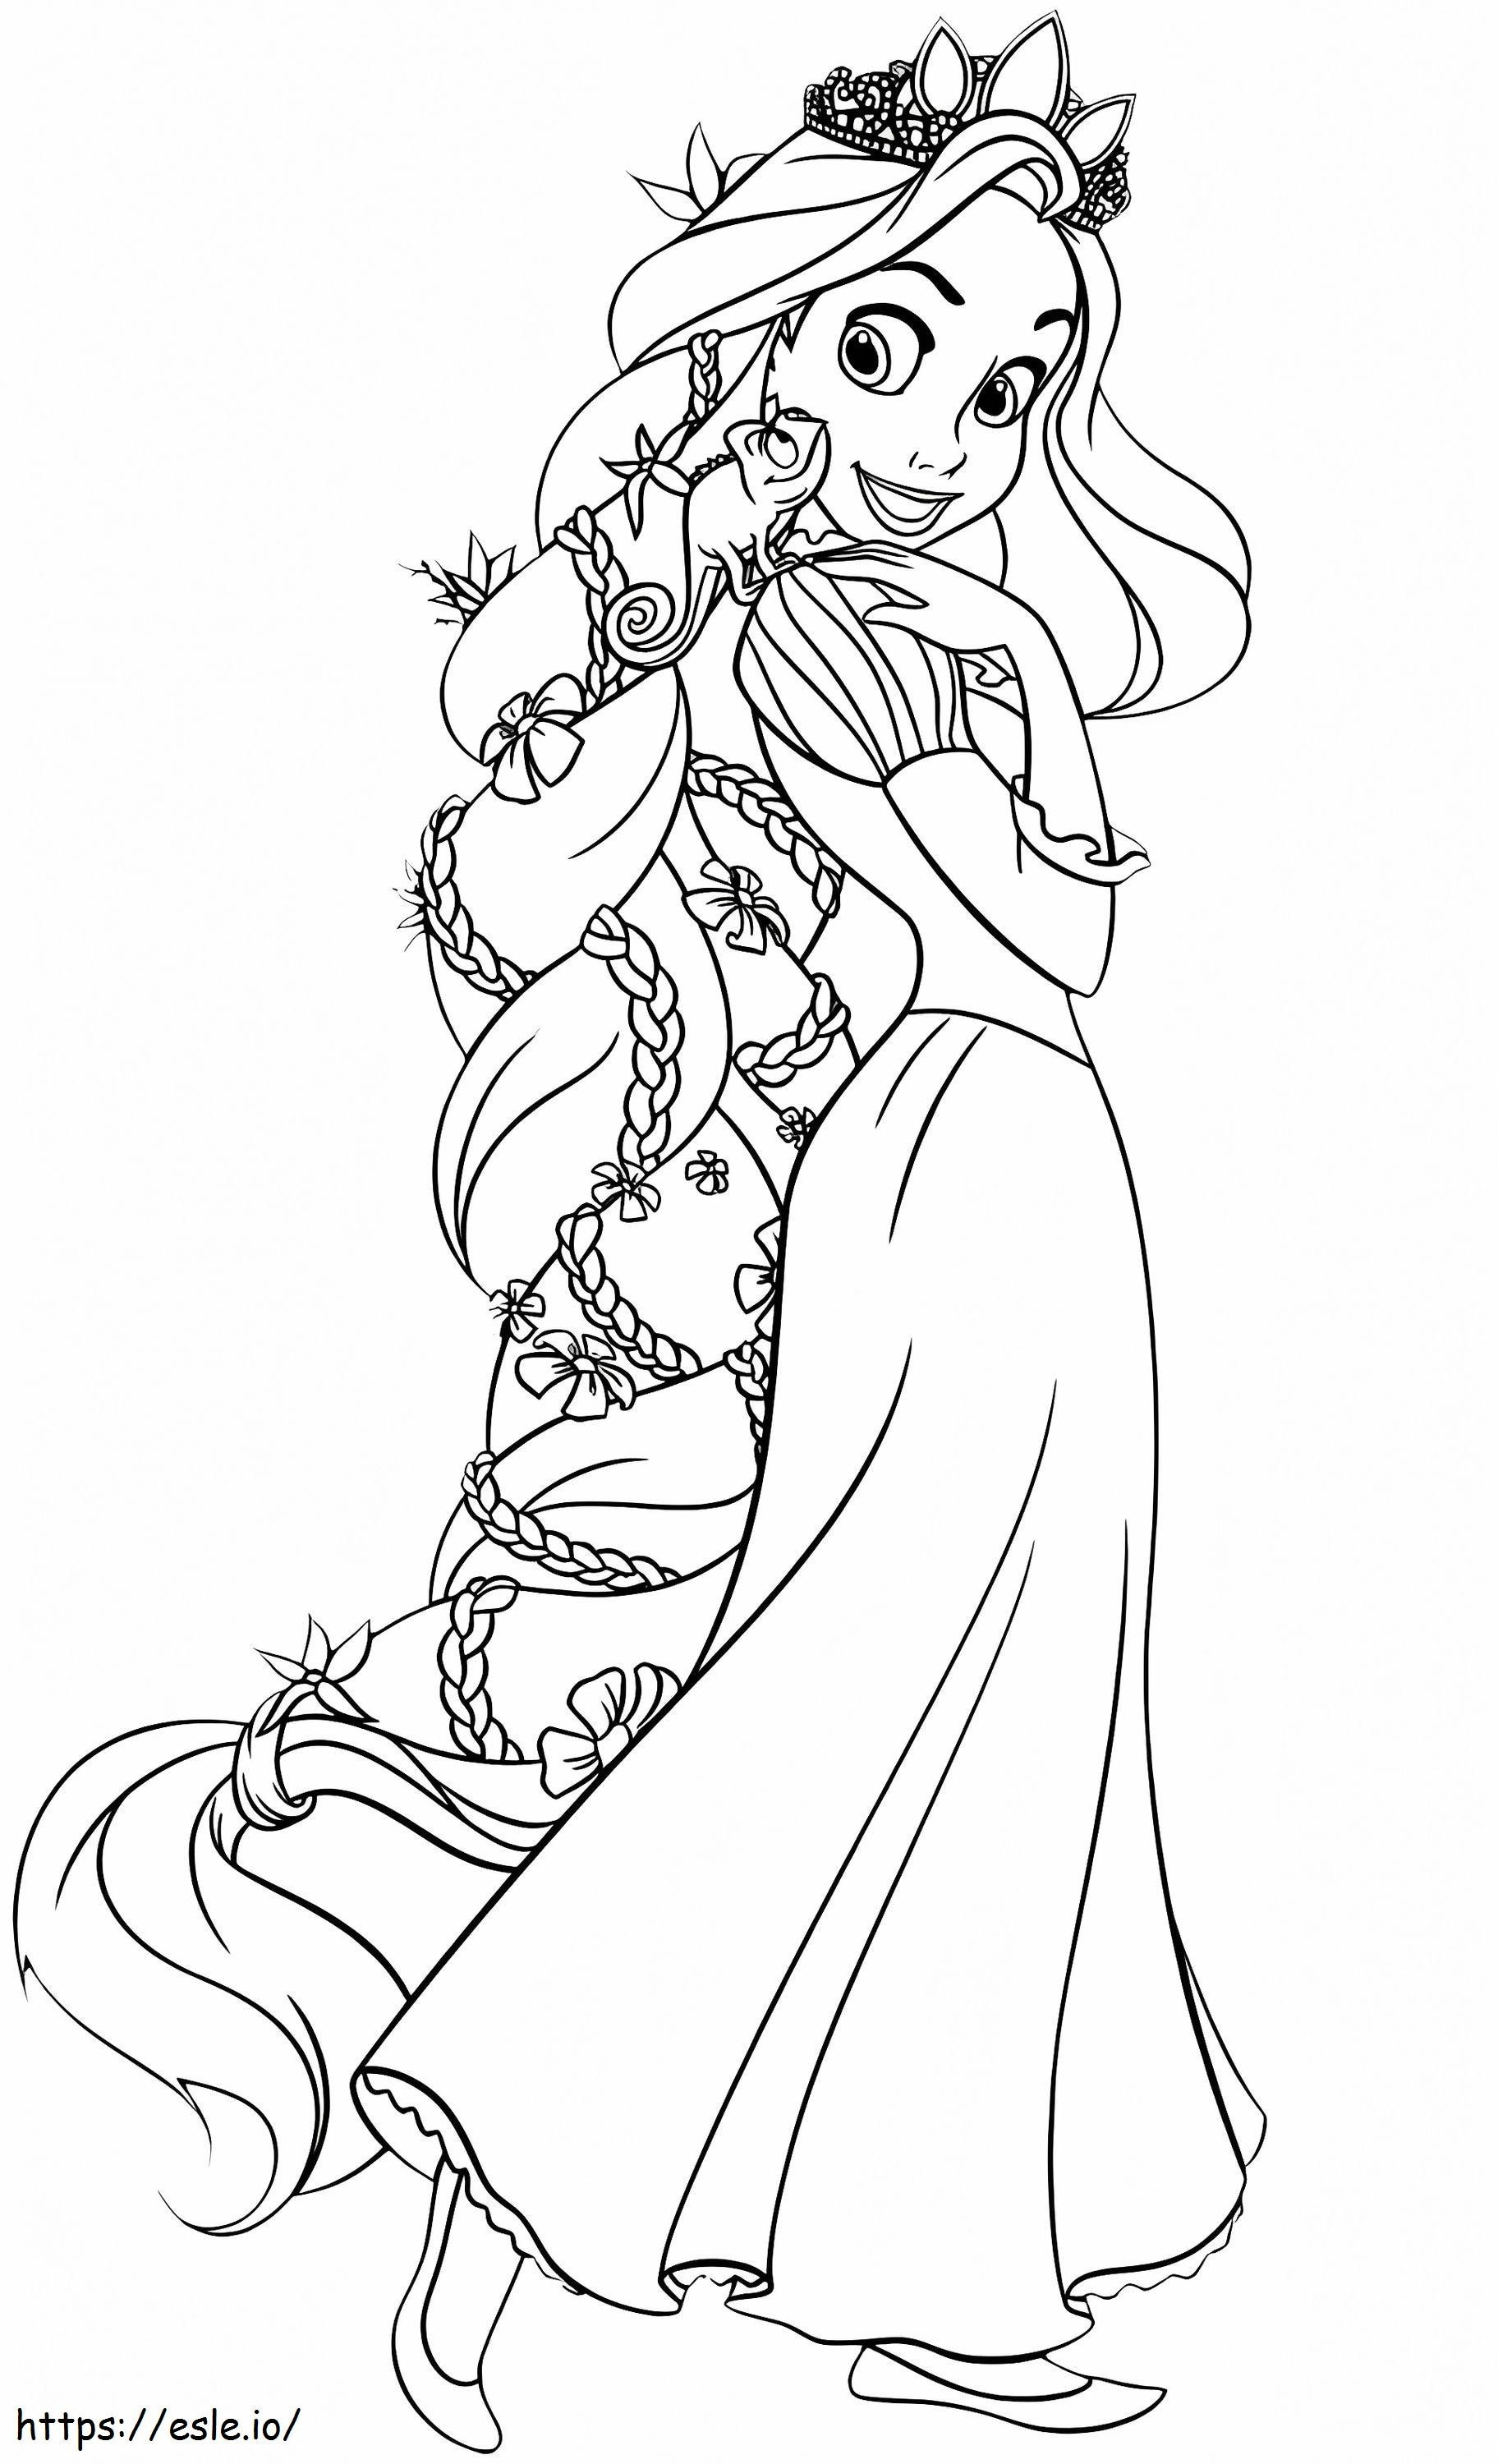 Fun Rapunzel With Gecko coloring page